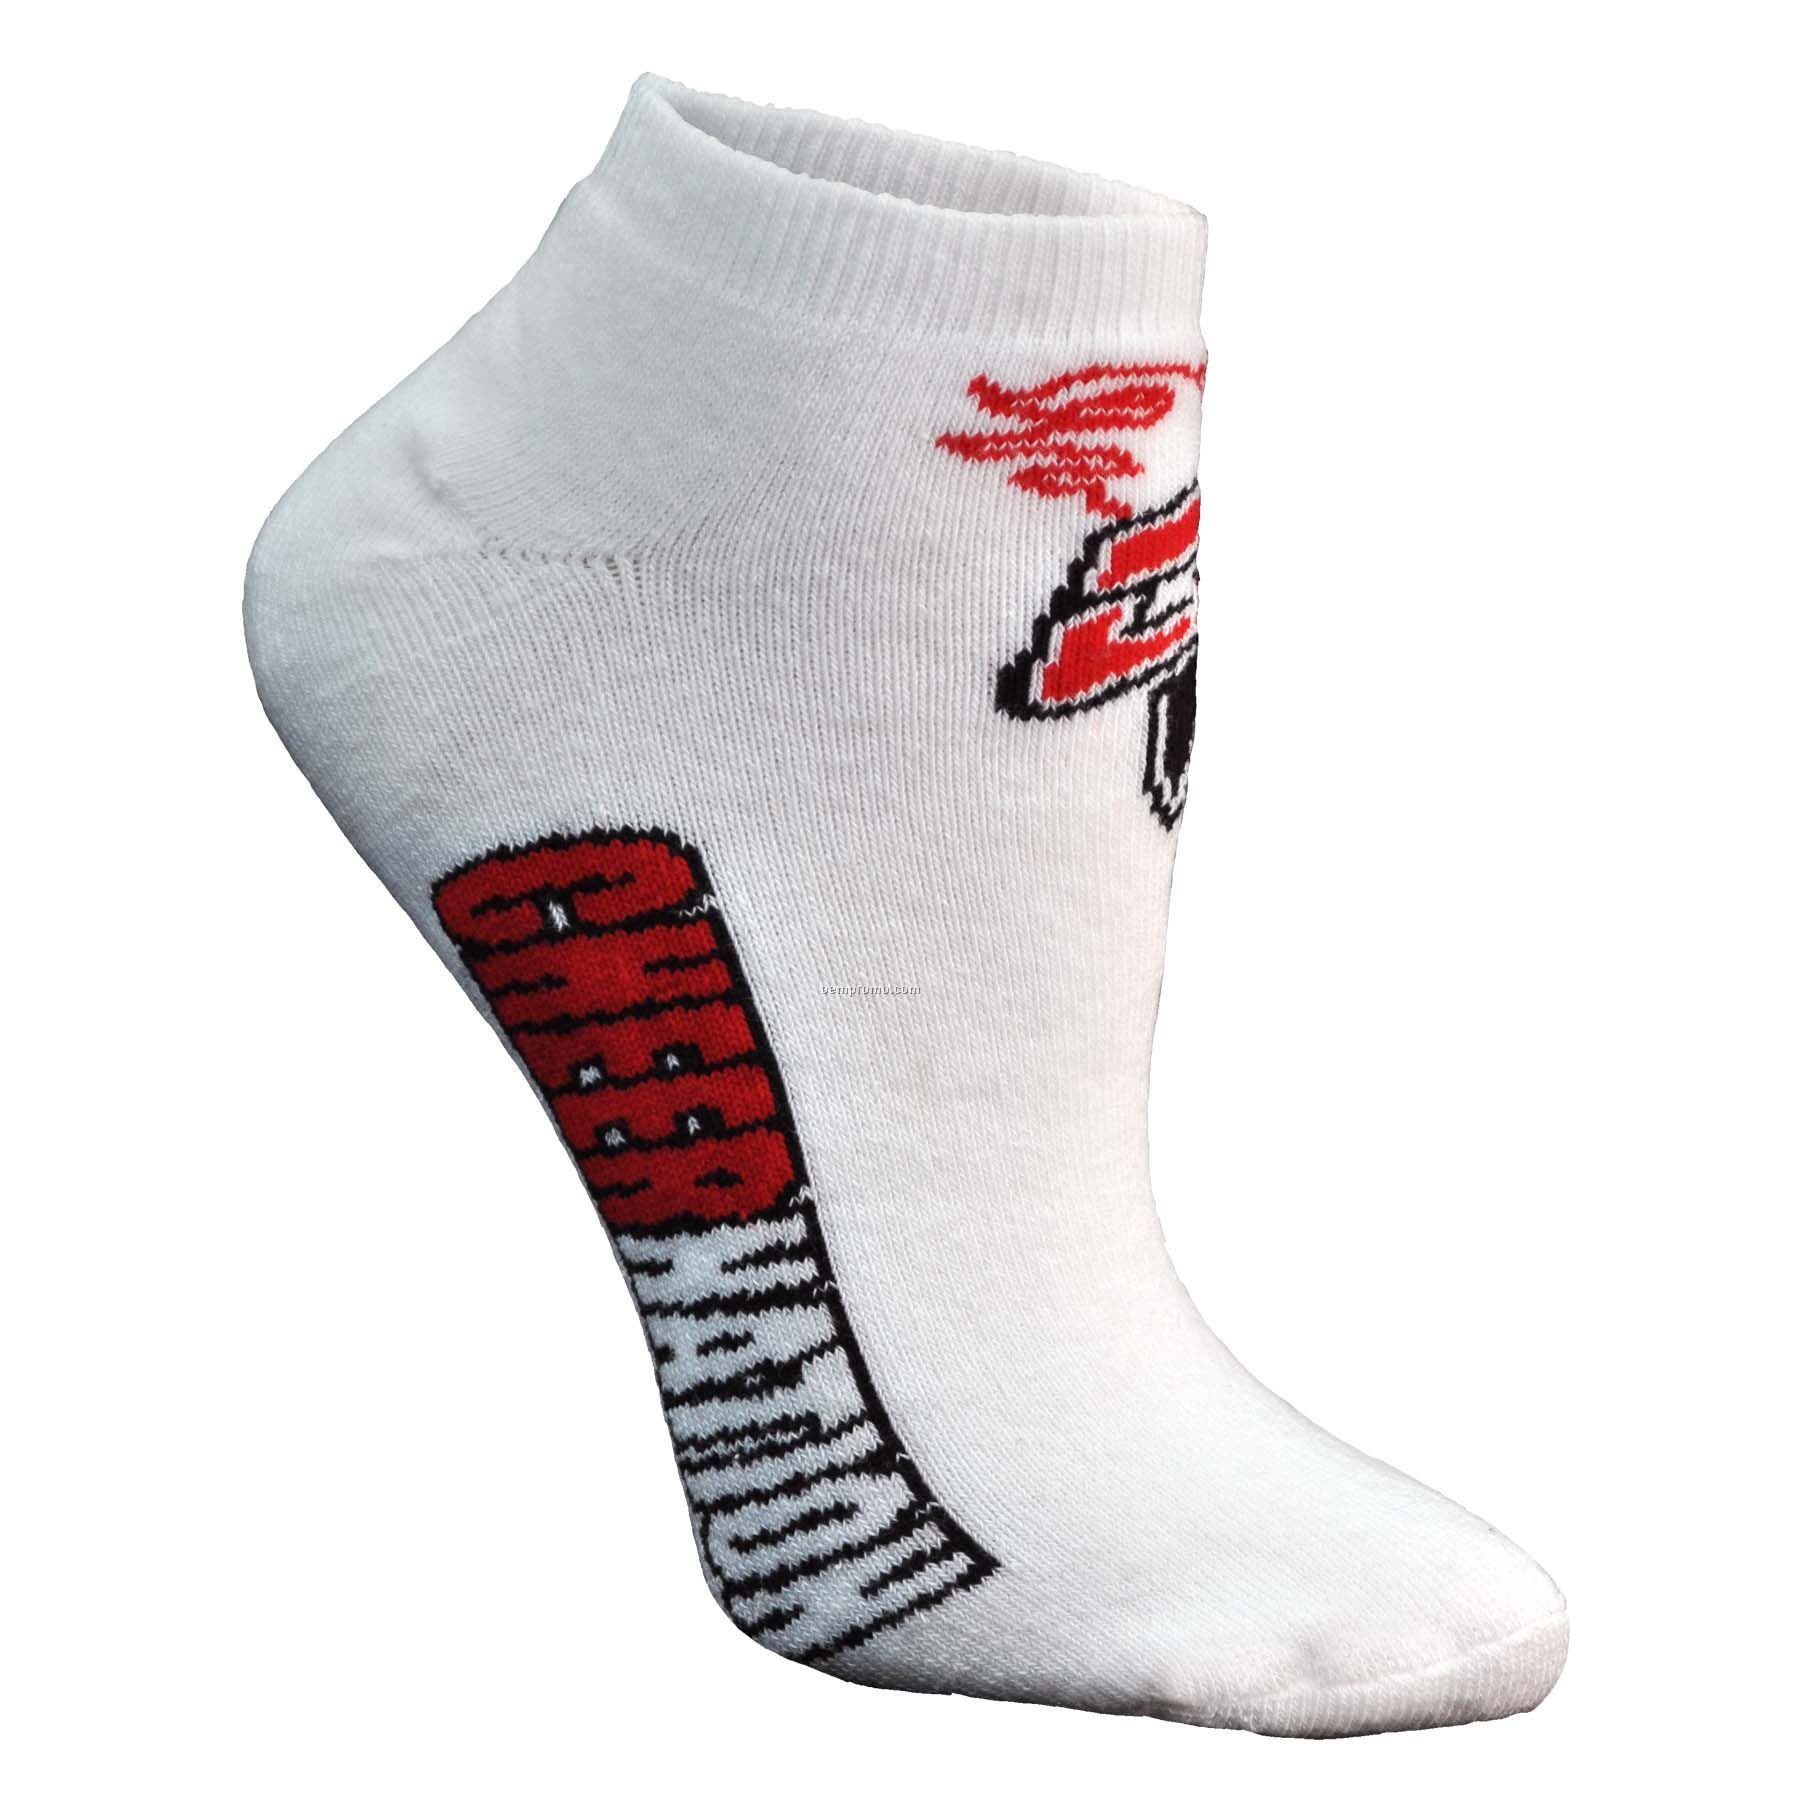 Super Soft Cotton No Show Socks With Knit-in Logo